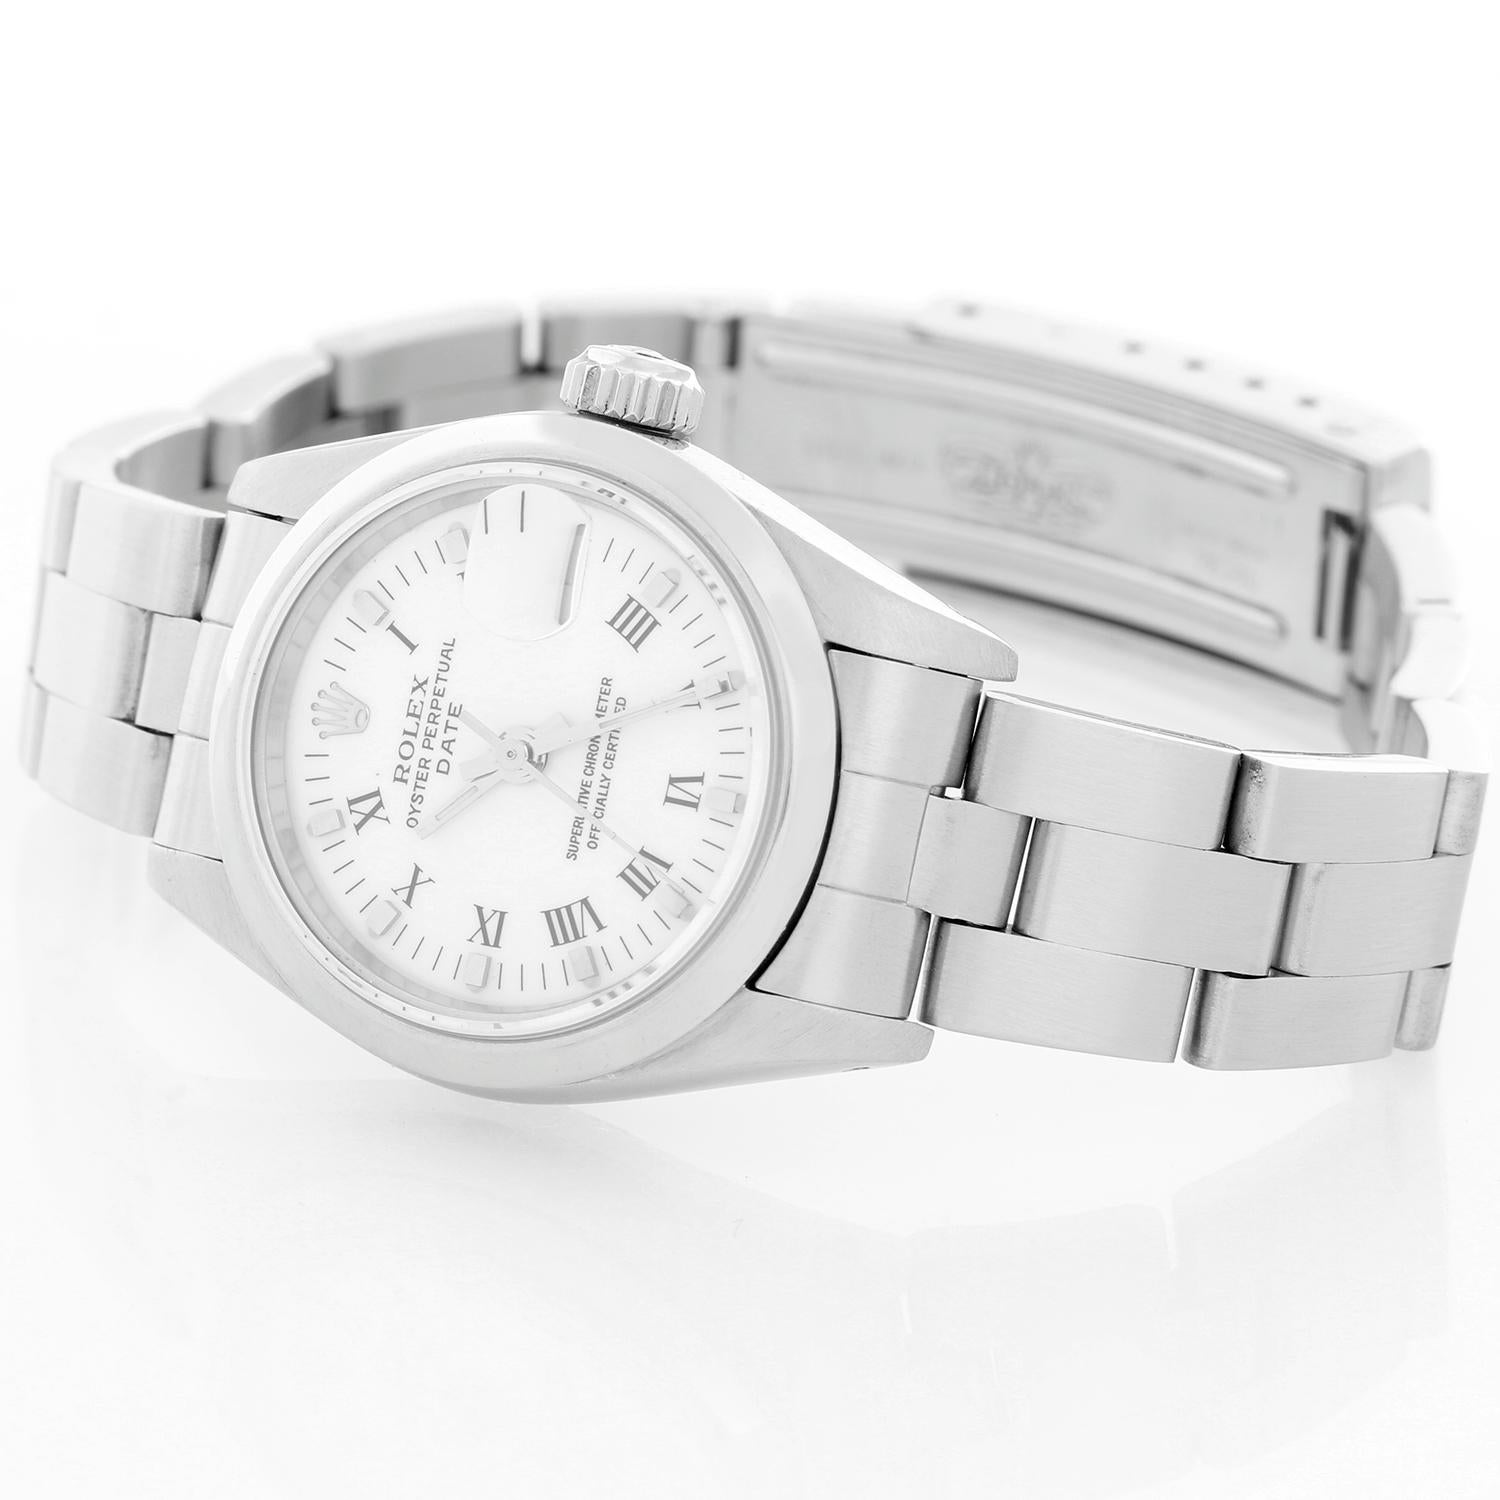 Rolex Ladies Datejust Stainless Steel  Watch - Automatic winding. Stainless steel case with smooth bezel. White dial with Roman numerals. Stainless steel Jubilee bracelet. Pre-owned with custom box .